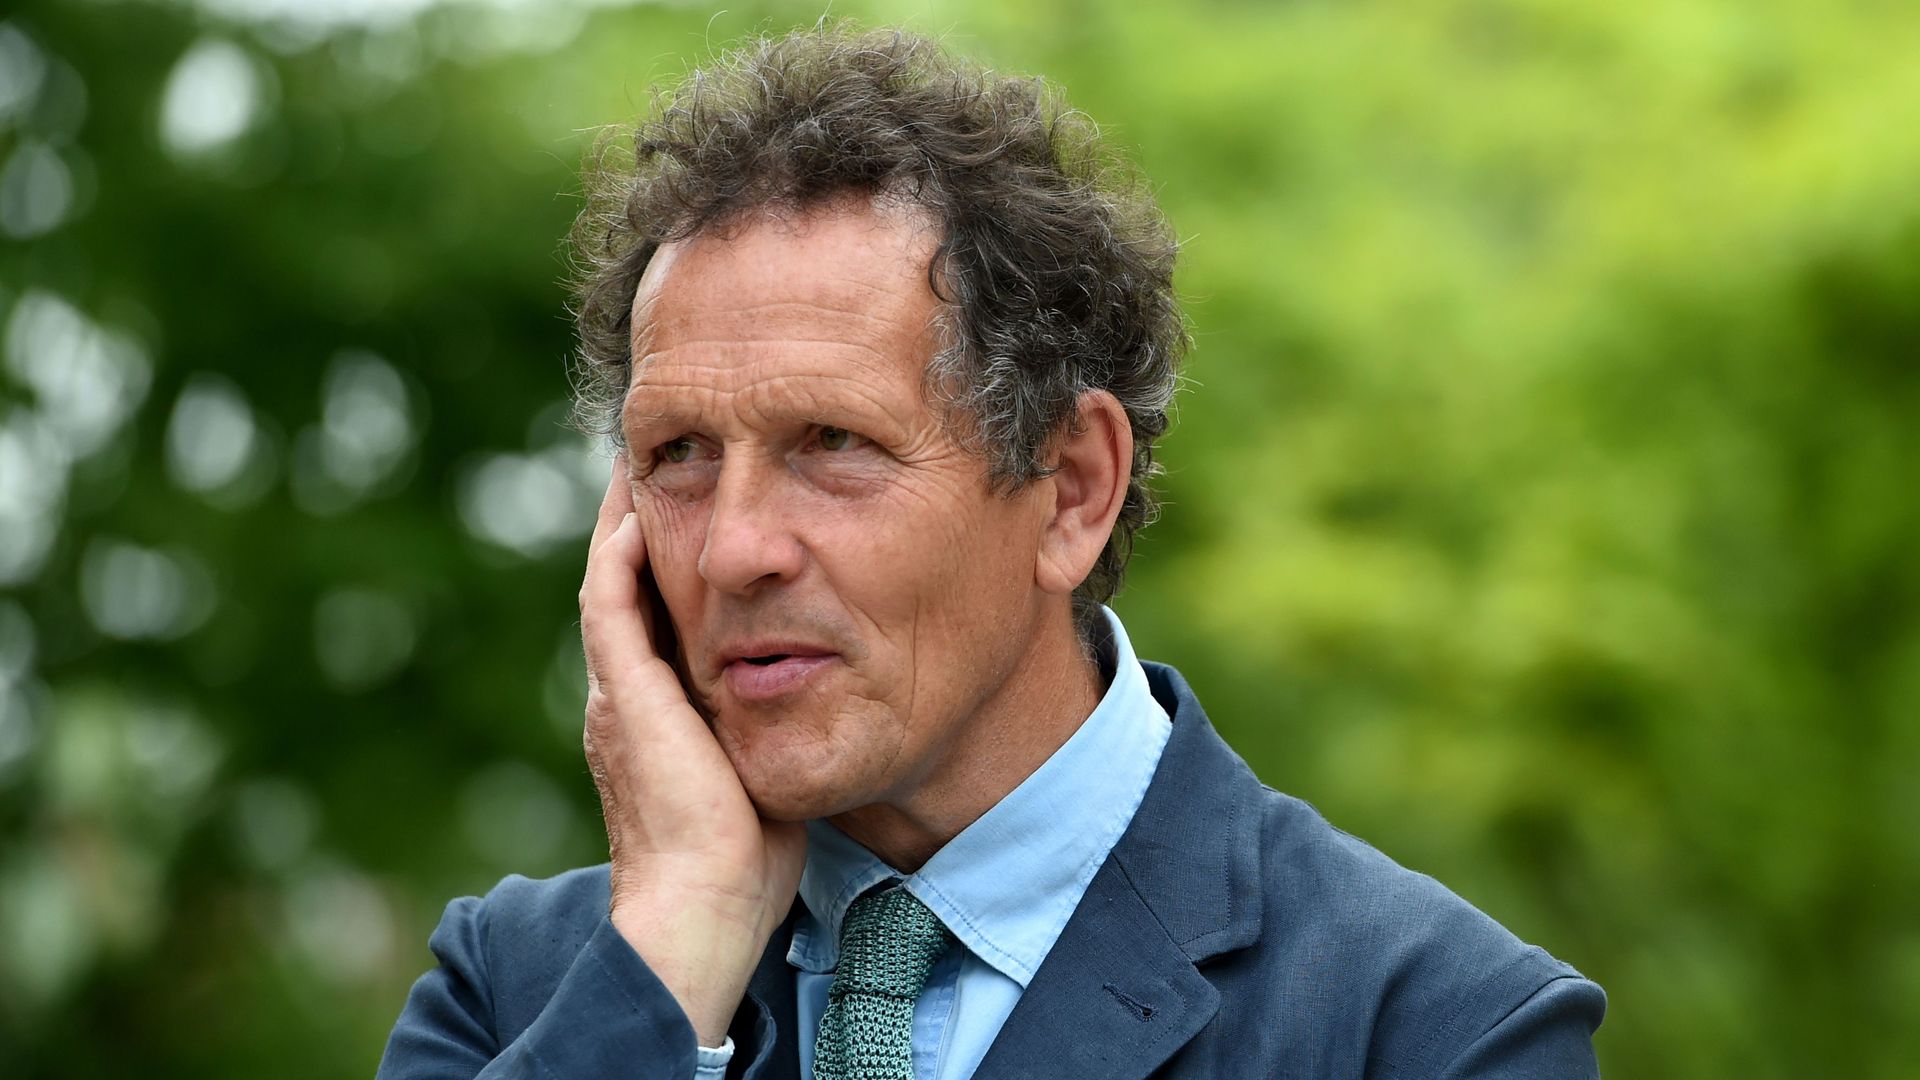 Monty Don with his head in his hand